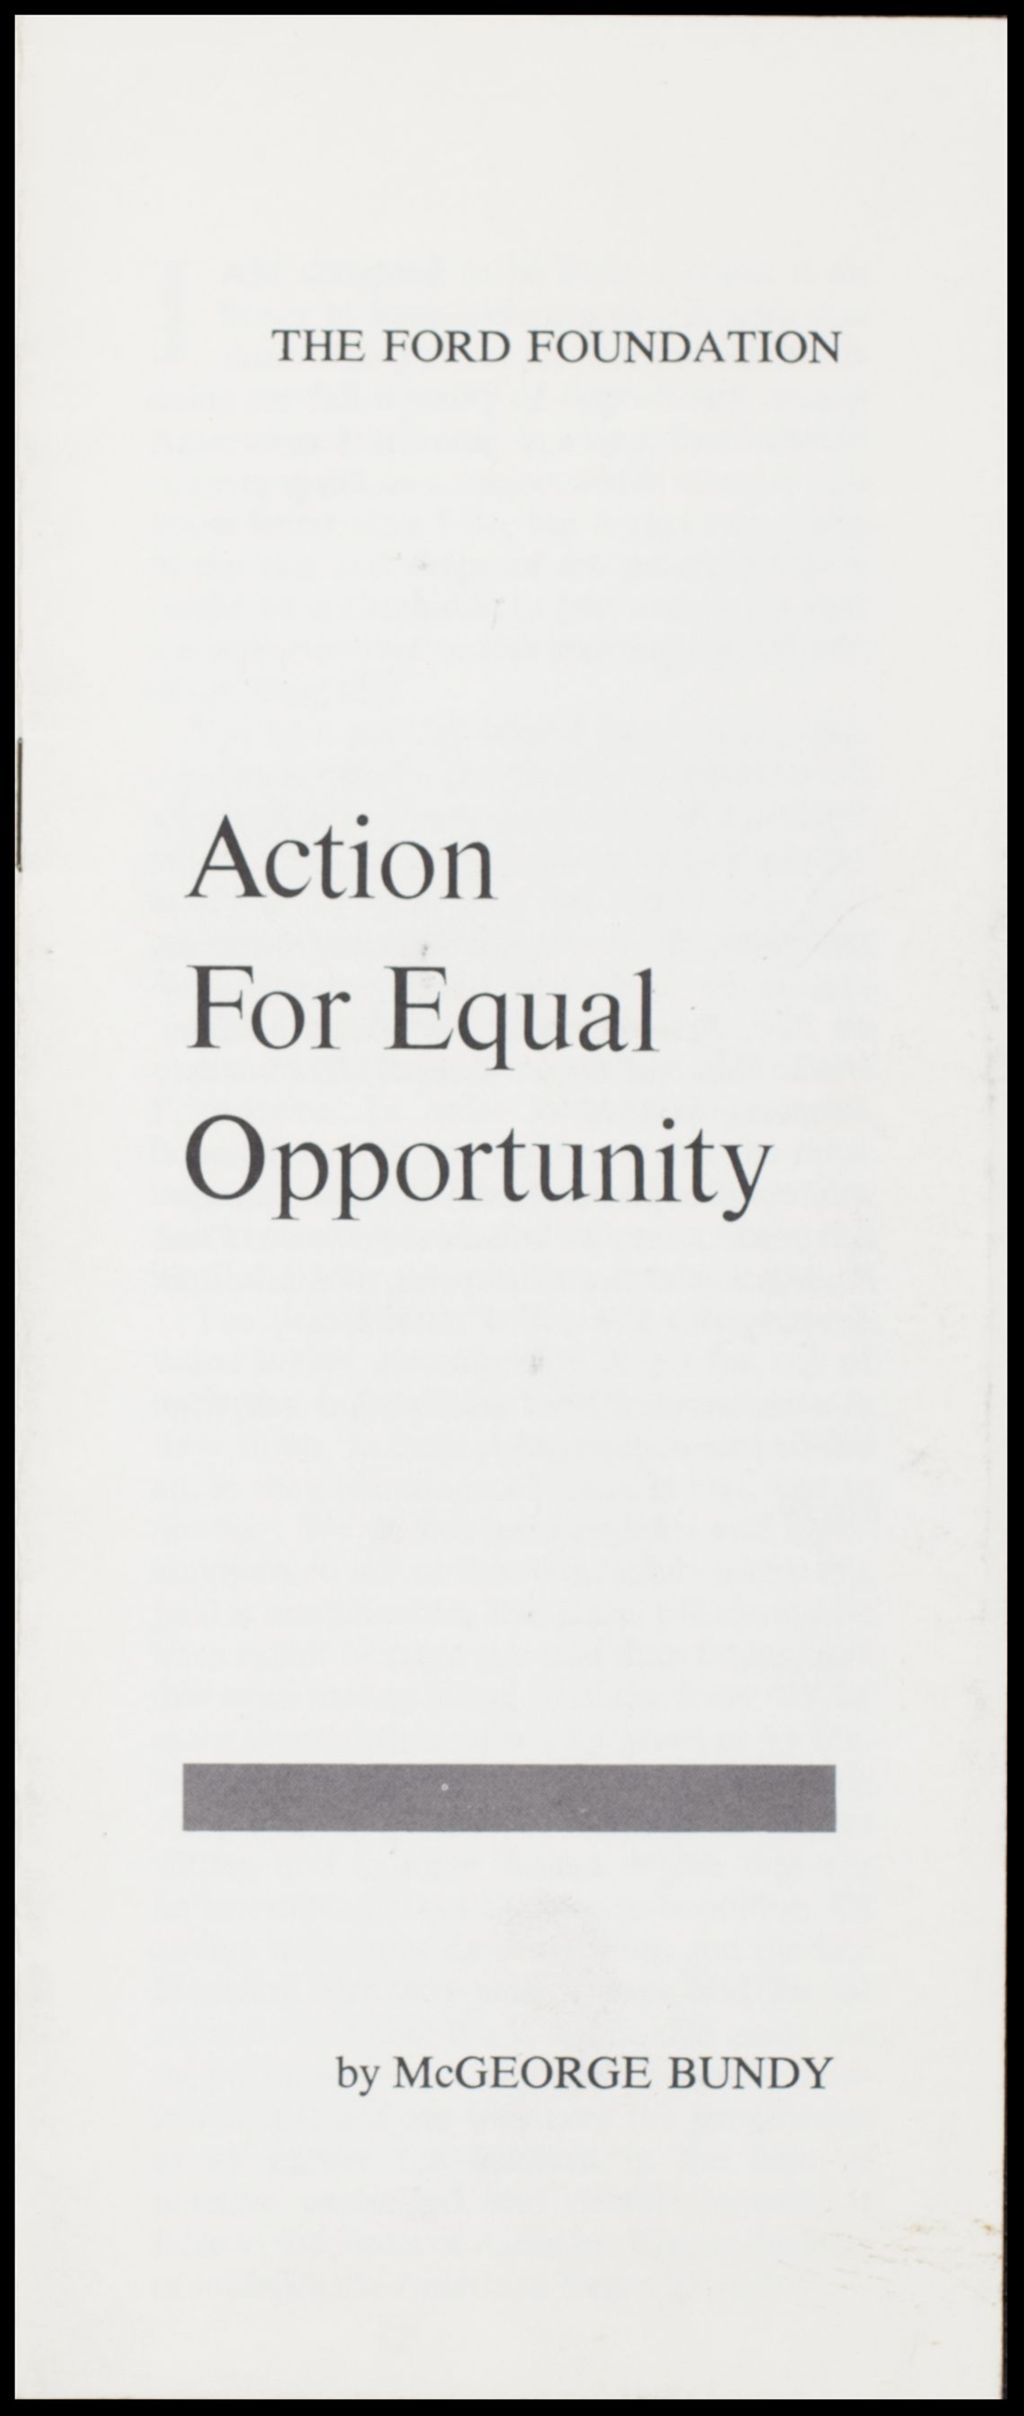 Miniature of Equal Opportunity, 1966 (Folder IV-761)